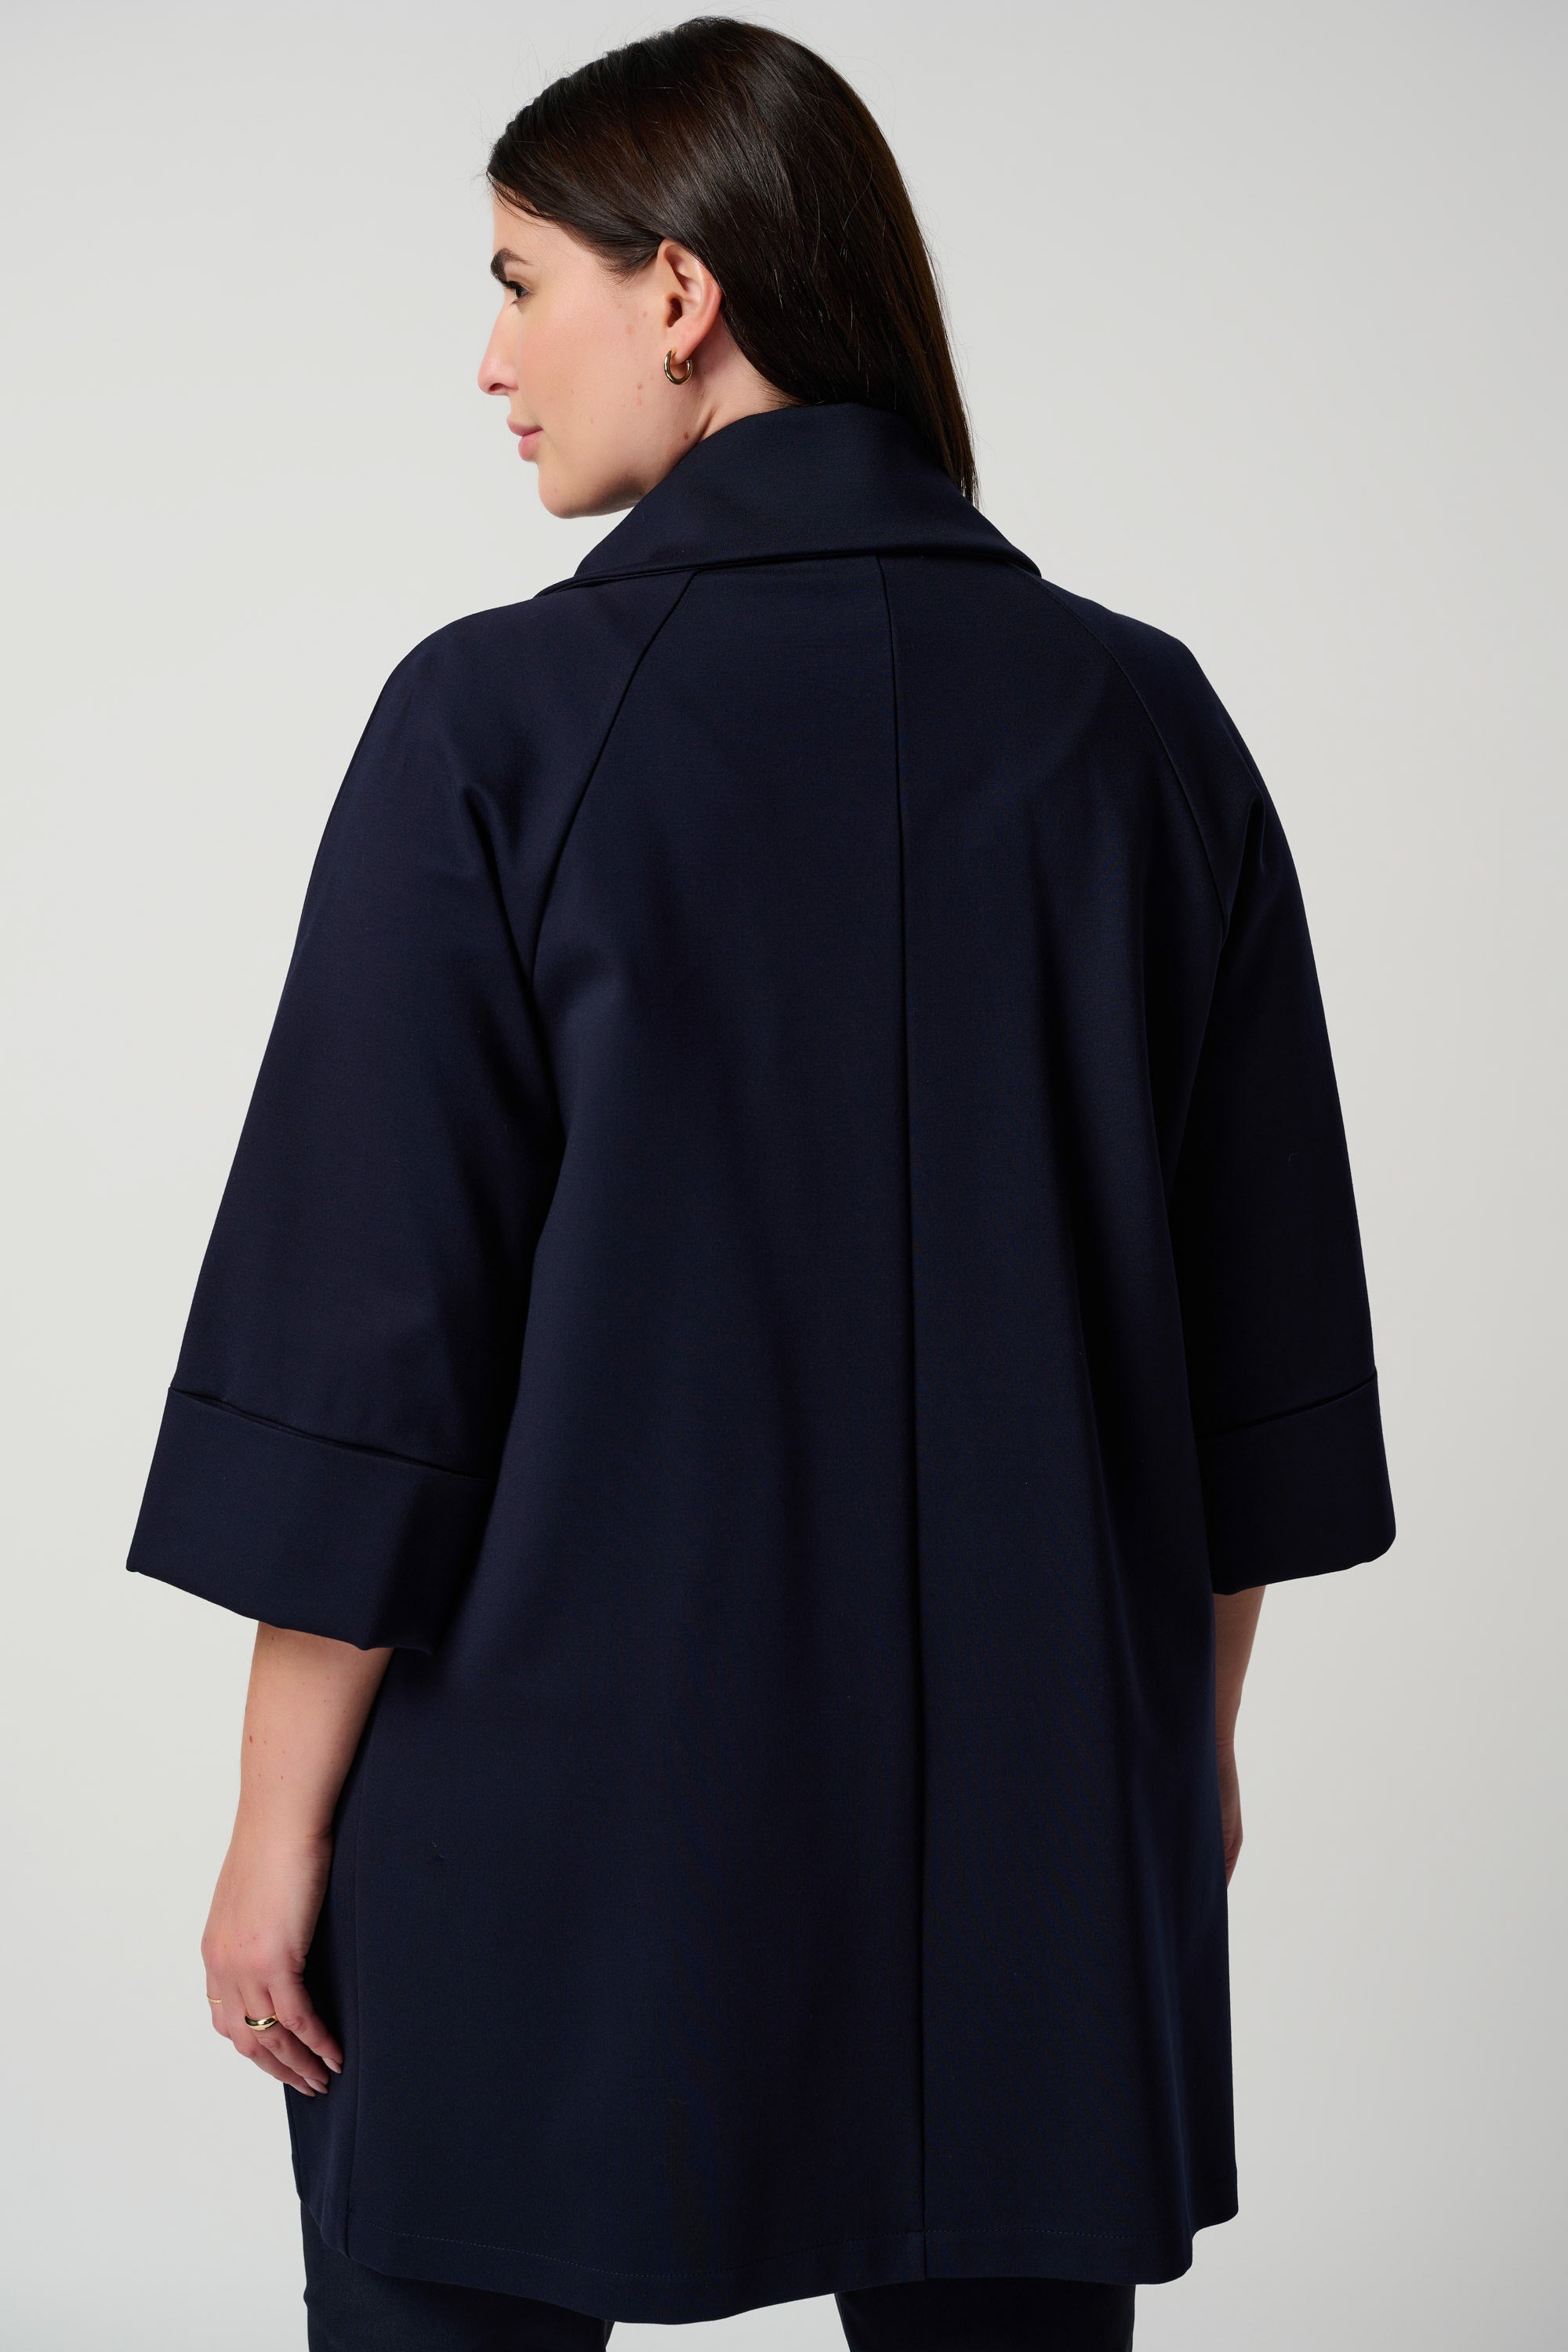 Back view of Joseph RIbkoff (153302NOS) Women's 3/4 Sleeve Classic Cocoon Coat with Cowl Neck in Midnight Blue